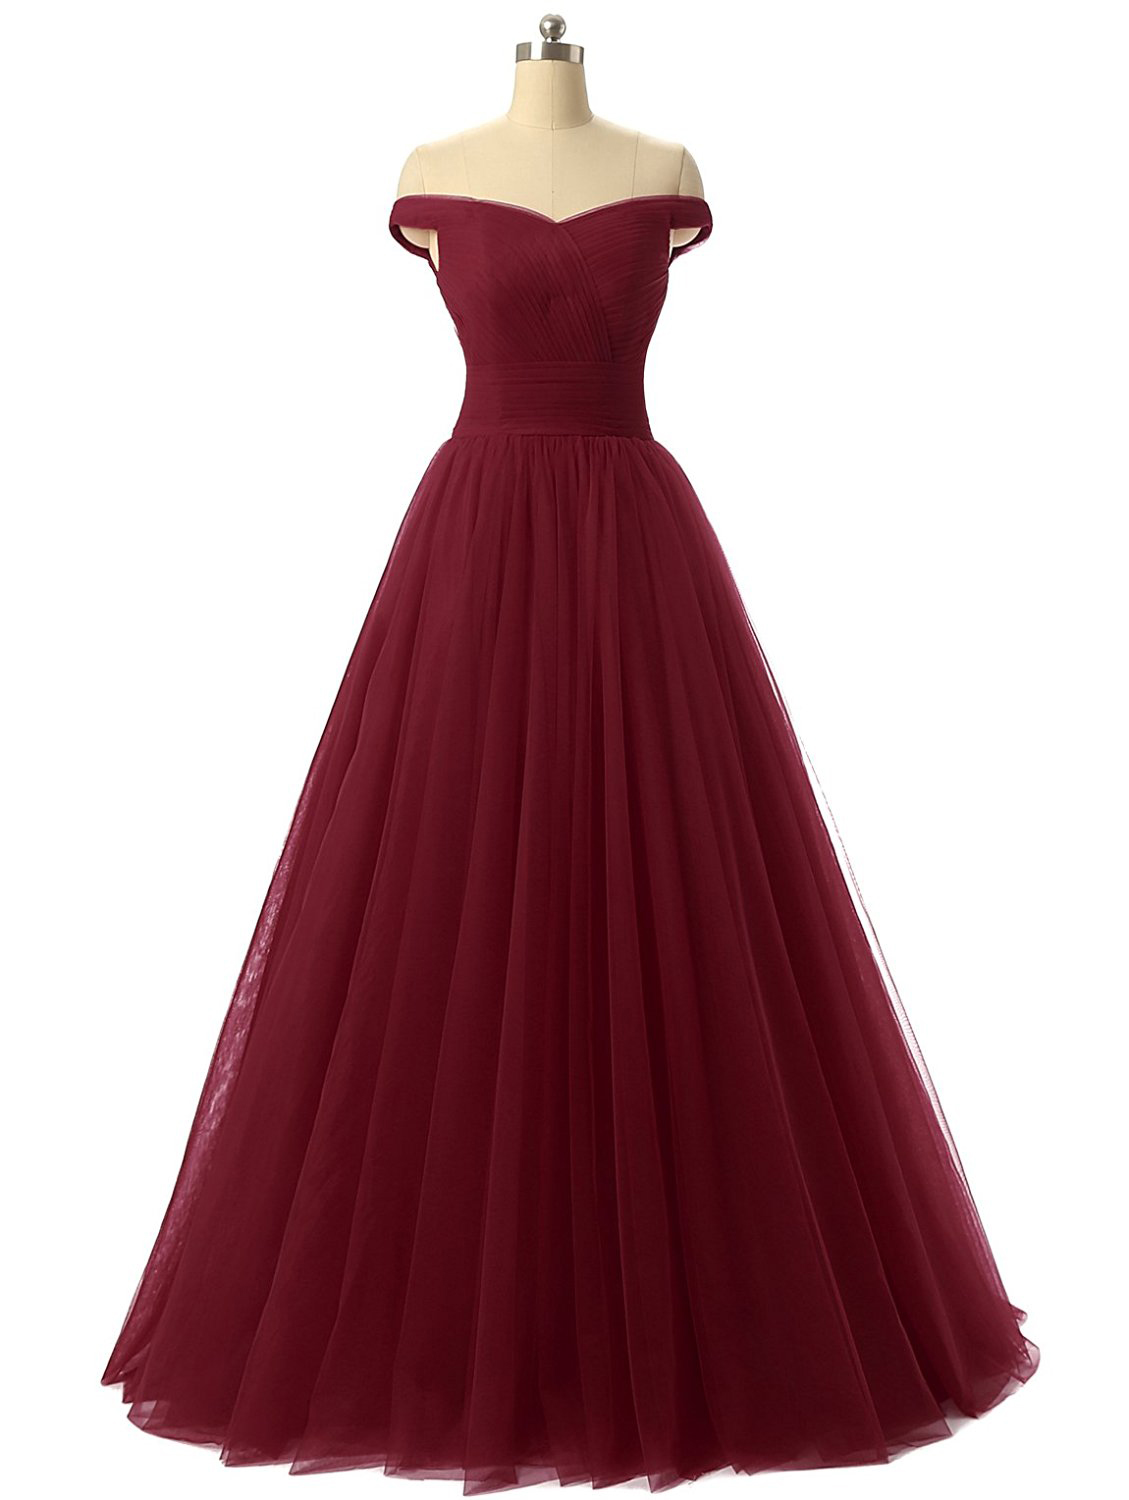 Red Prom Dresses, Formal Evening Dress, Sexy Burgundy Prom Dresses, Red Evening Dress, A Line Prom Dress, Off The Shoulder Prom Dress, Ball Gown